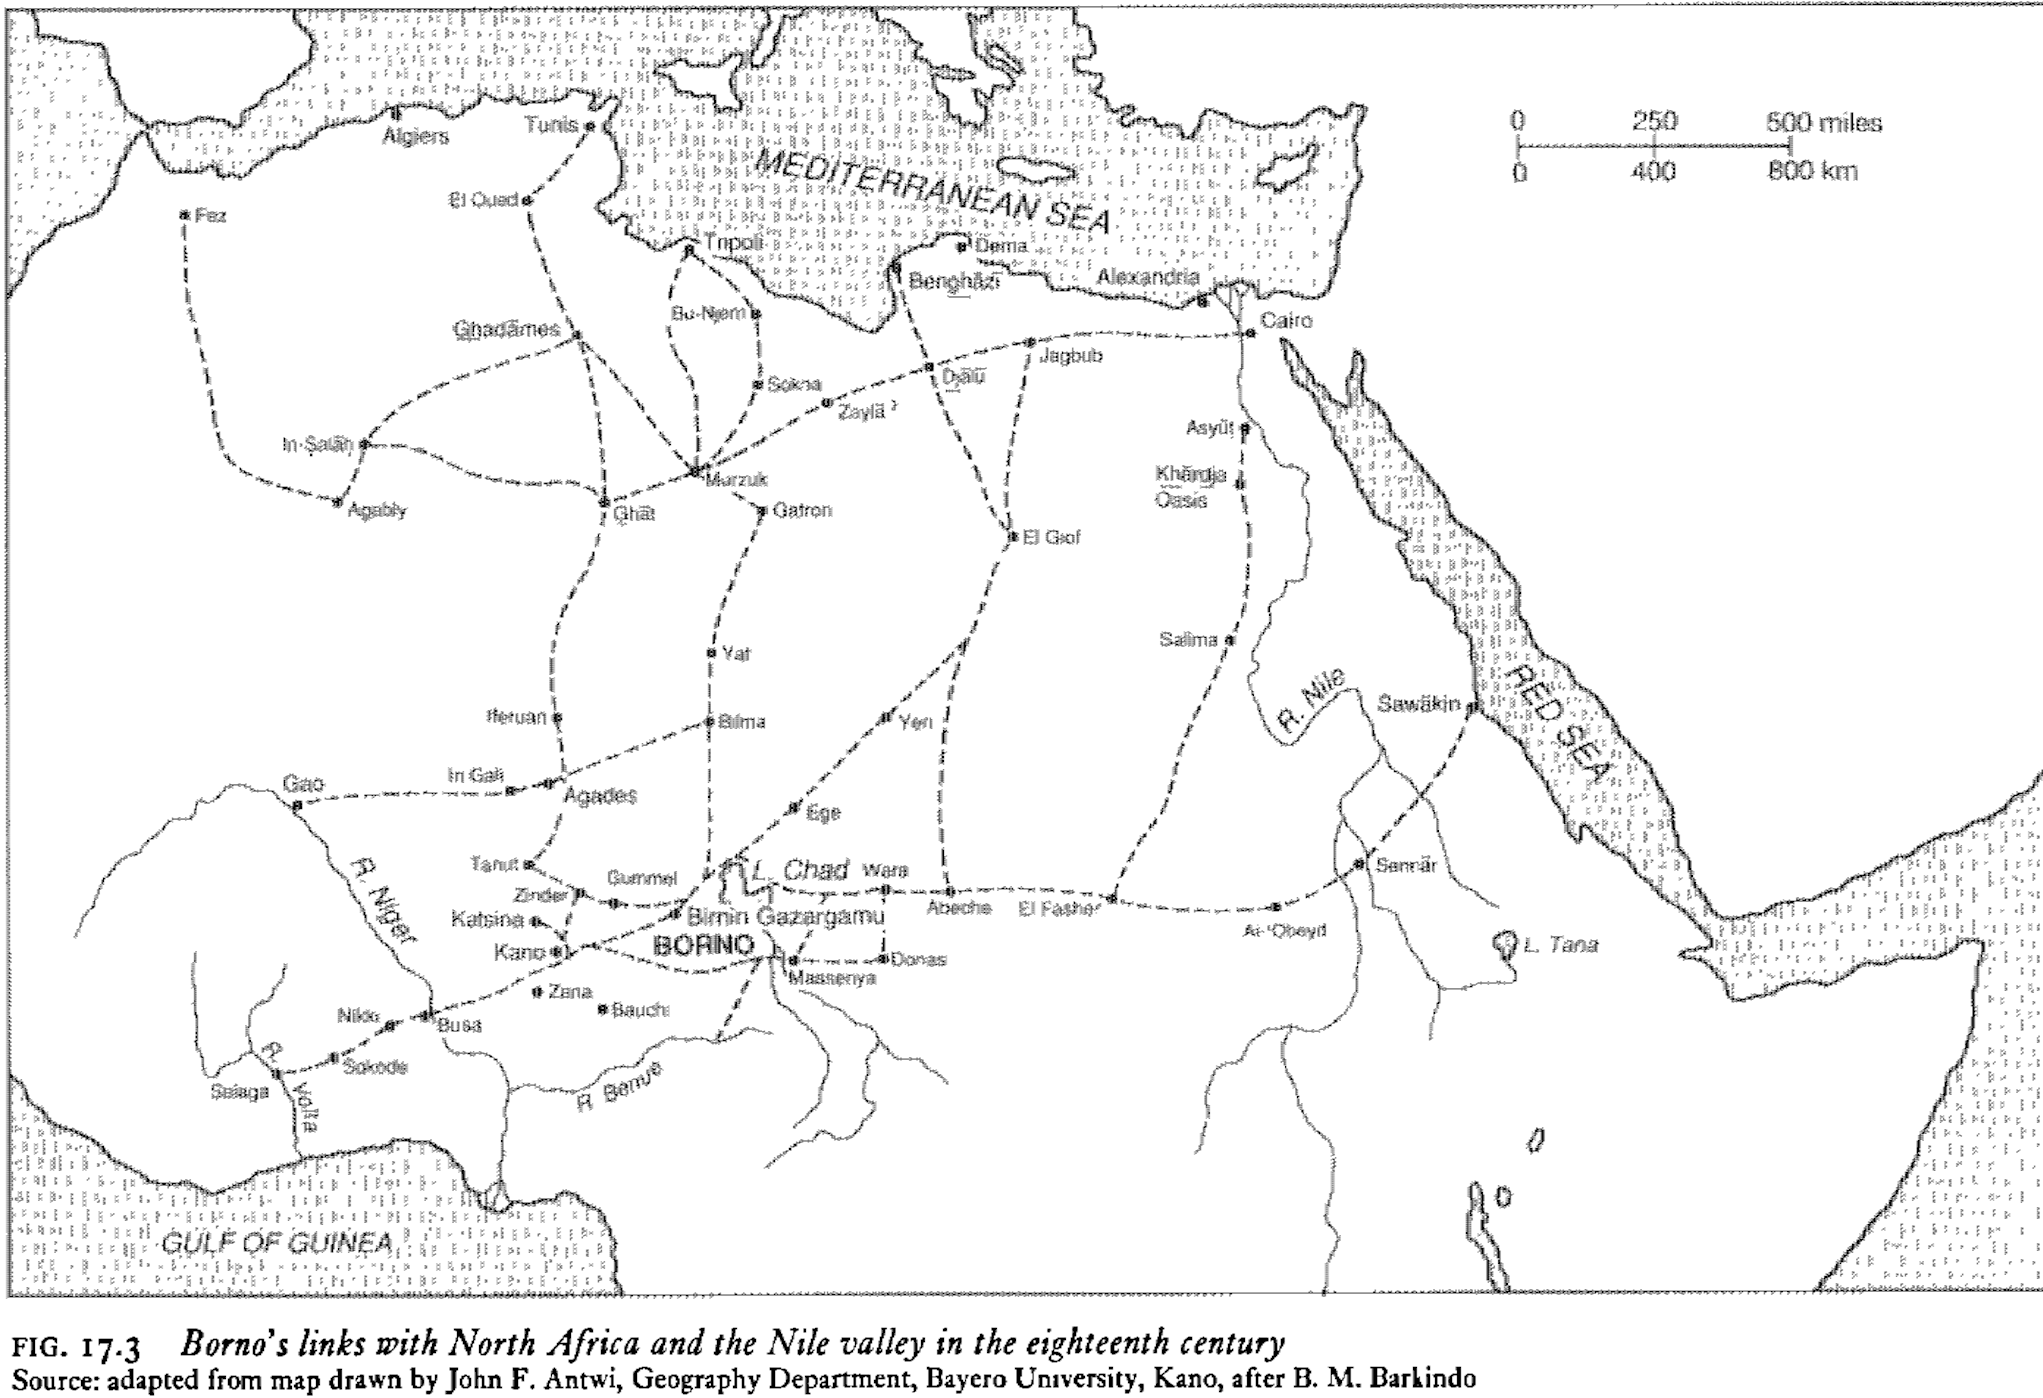 Borno's links with North Africa and the Nile valley in the eighteenth century.png